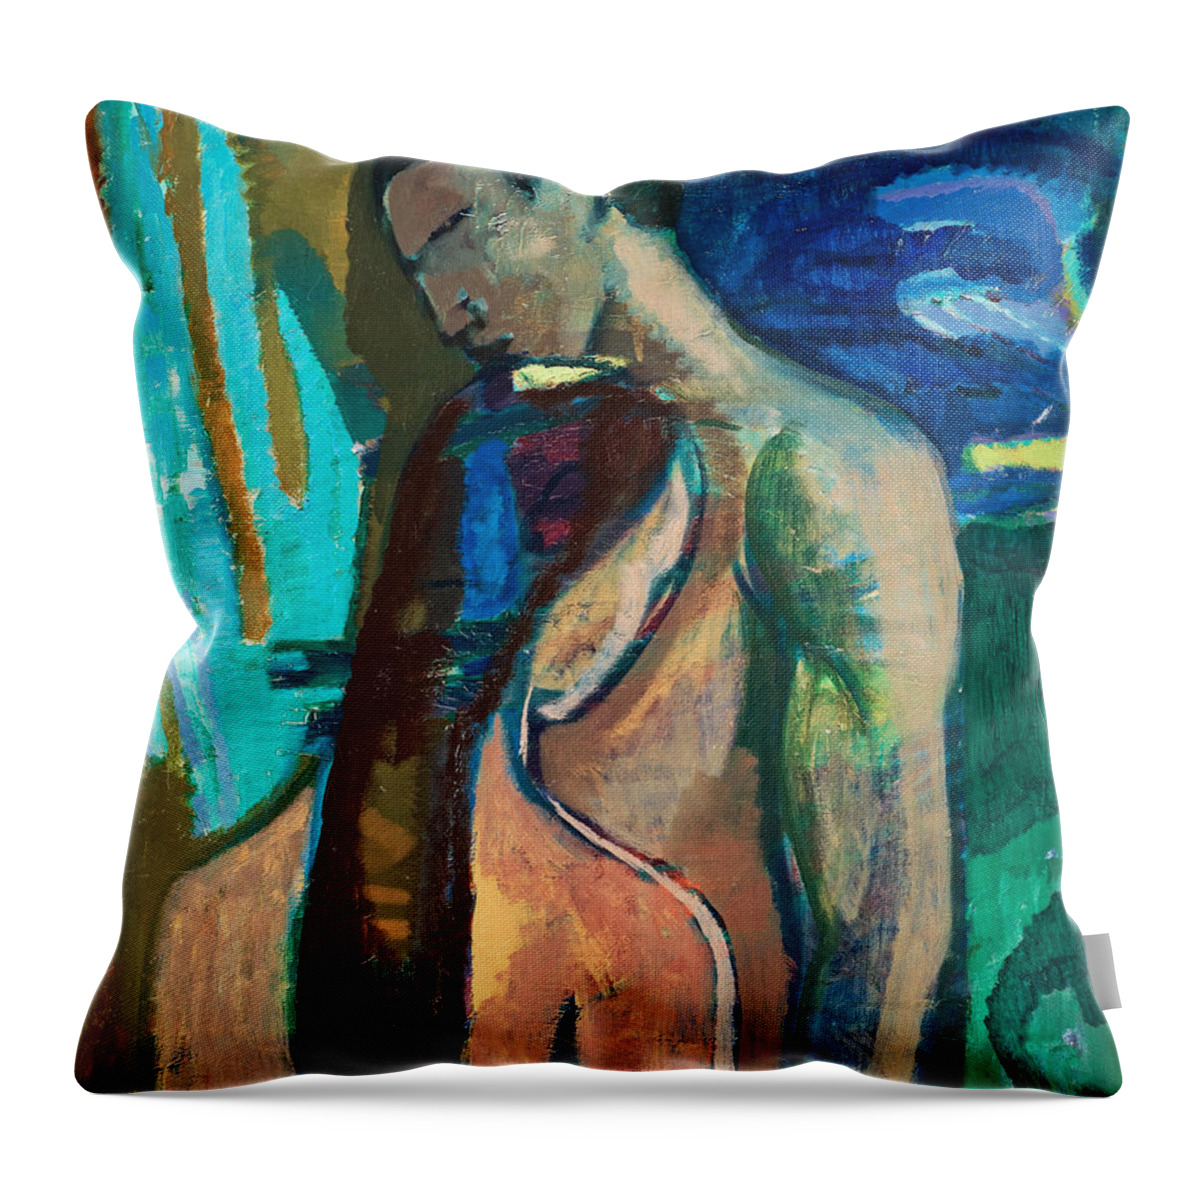 Alex Throw Pillow featuring the painting Youth by Alex Torneman